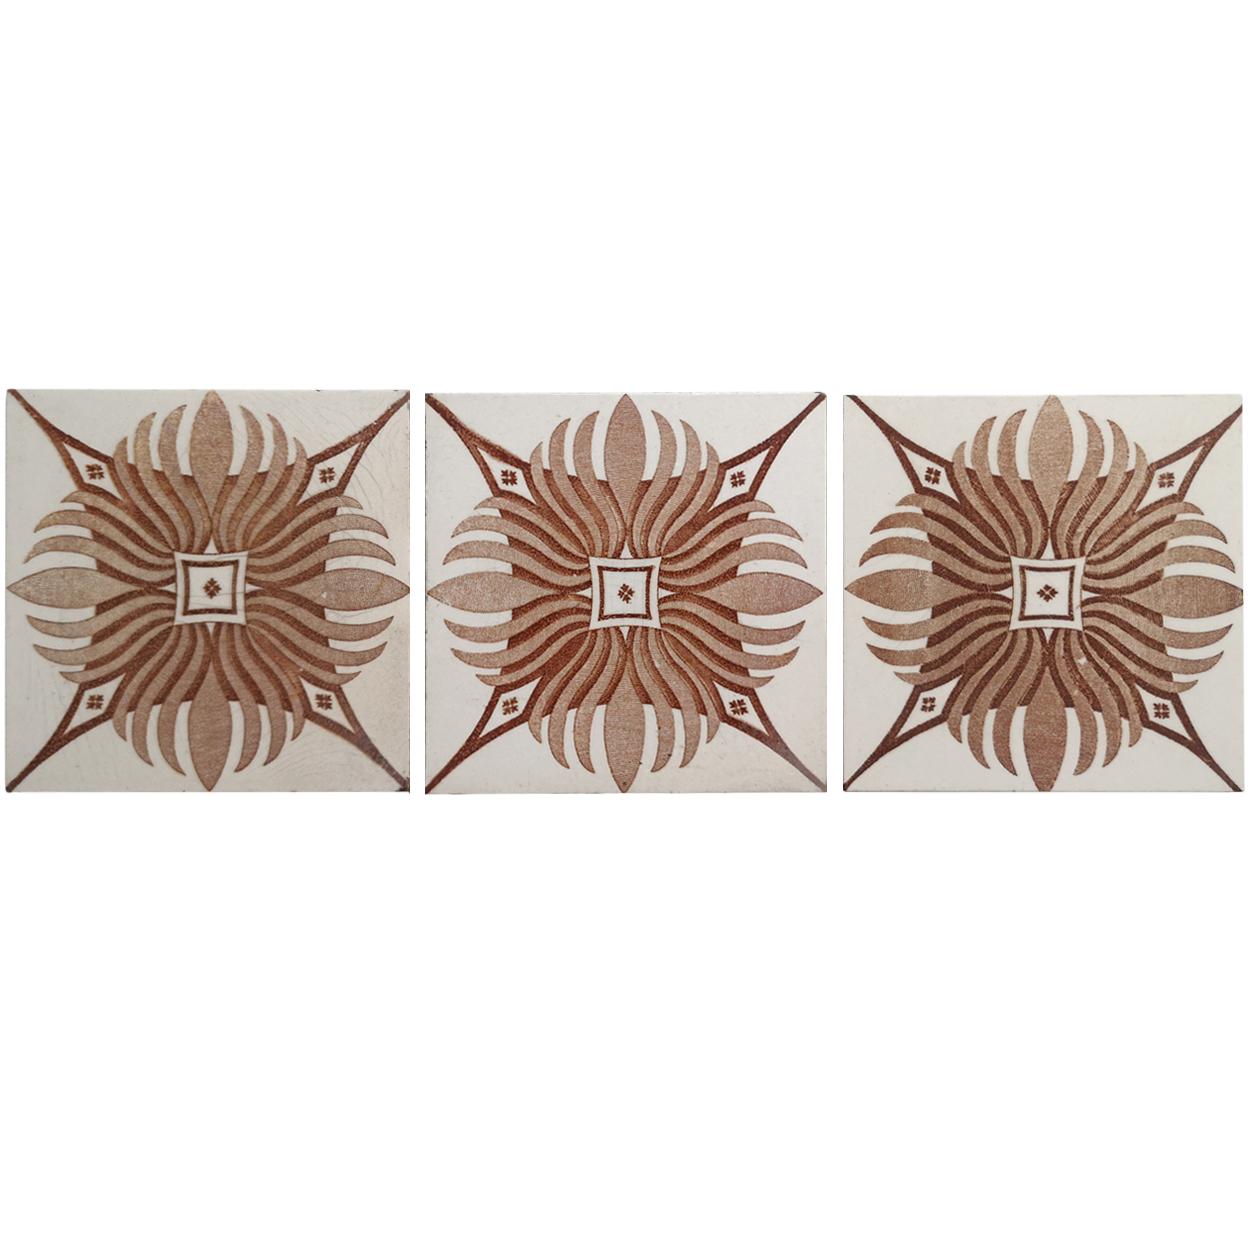 Set of exceptional antique wall tiles, with a wonderful rich Art Deco pattern.
The dimensions per tile are 4.7 inch (12 cm) x 4.7 inch (12 cm).

Please note that the piece is for 1 piece! Several pieces available. 

Condition is generally very